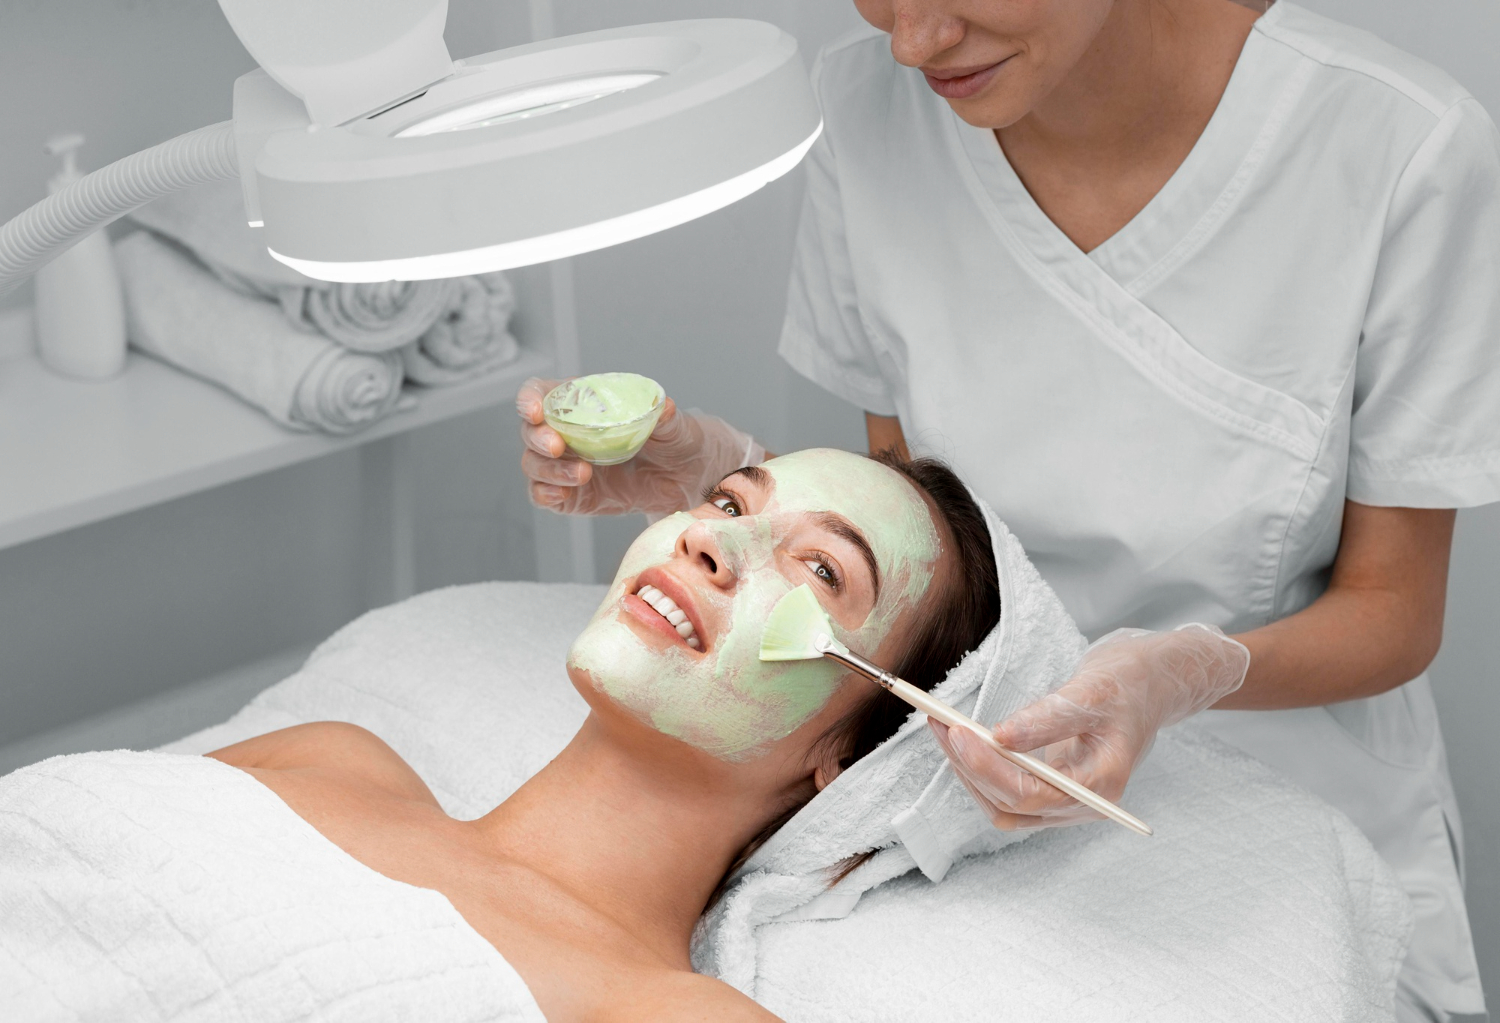 Categories of skin treatments to achieve perfection in beauty and the best skin clinic to get 100% genuine results